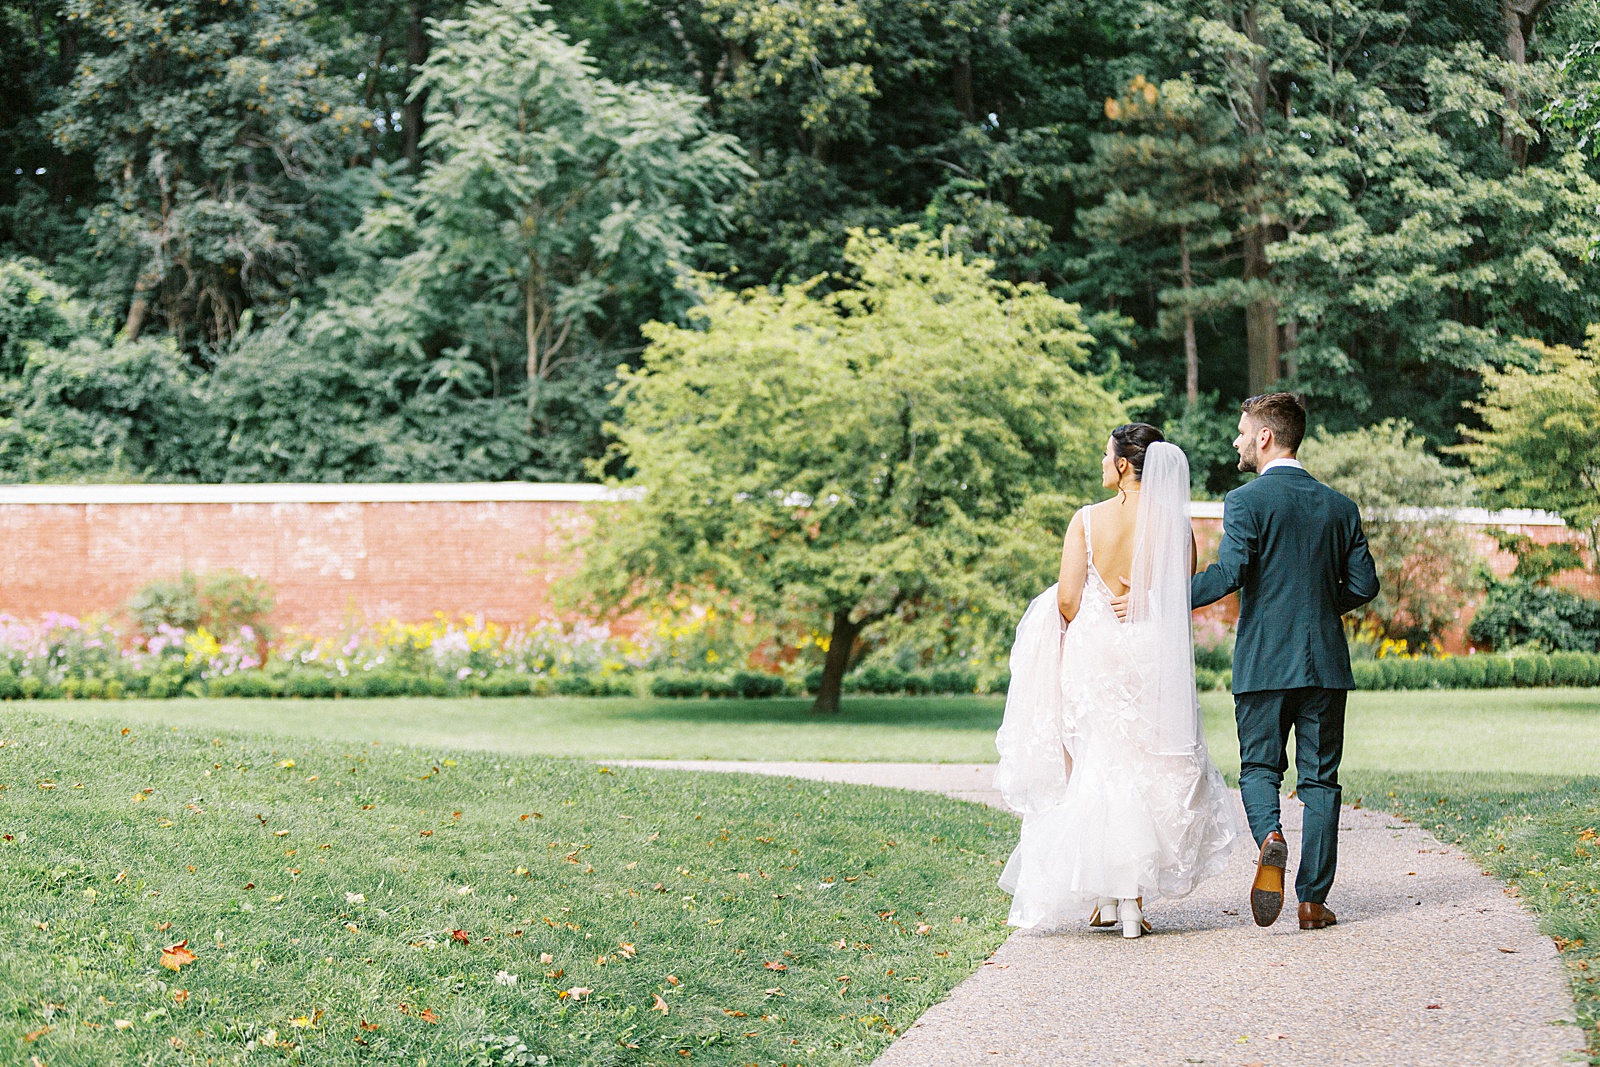 Bride and groom approach ceremony in a garden together.